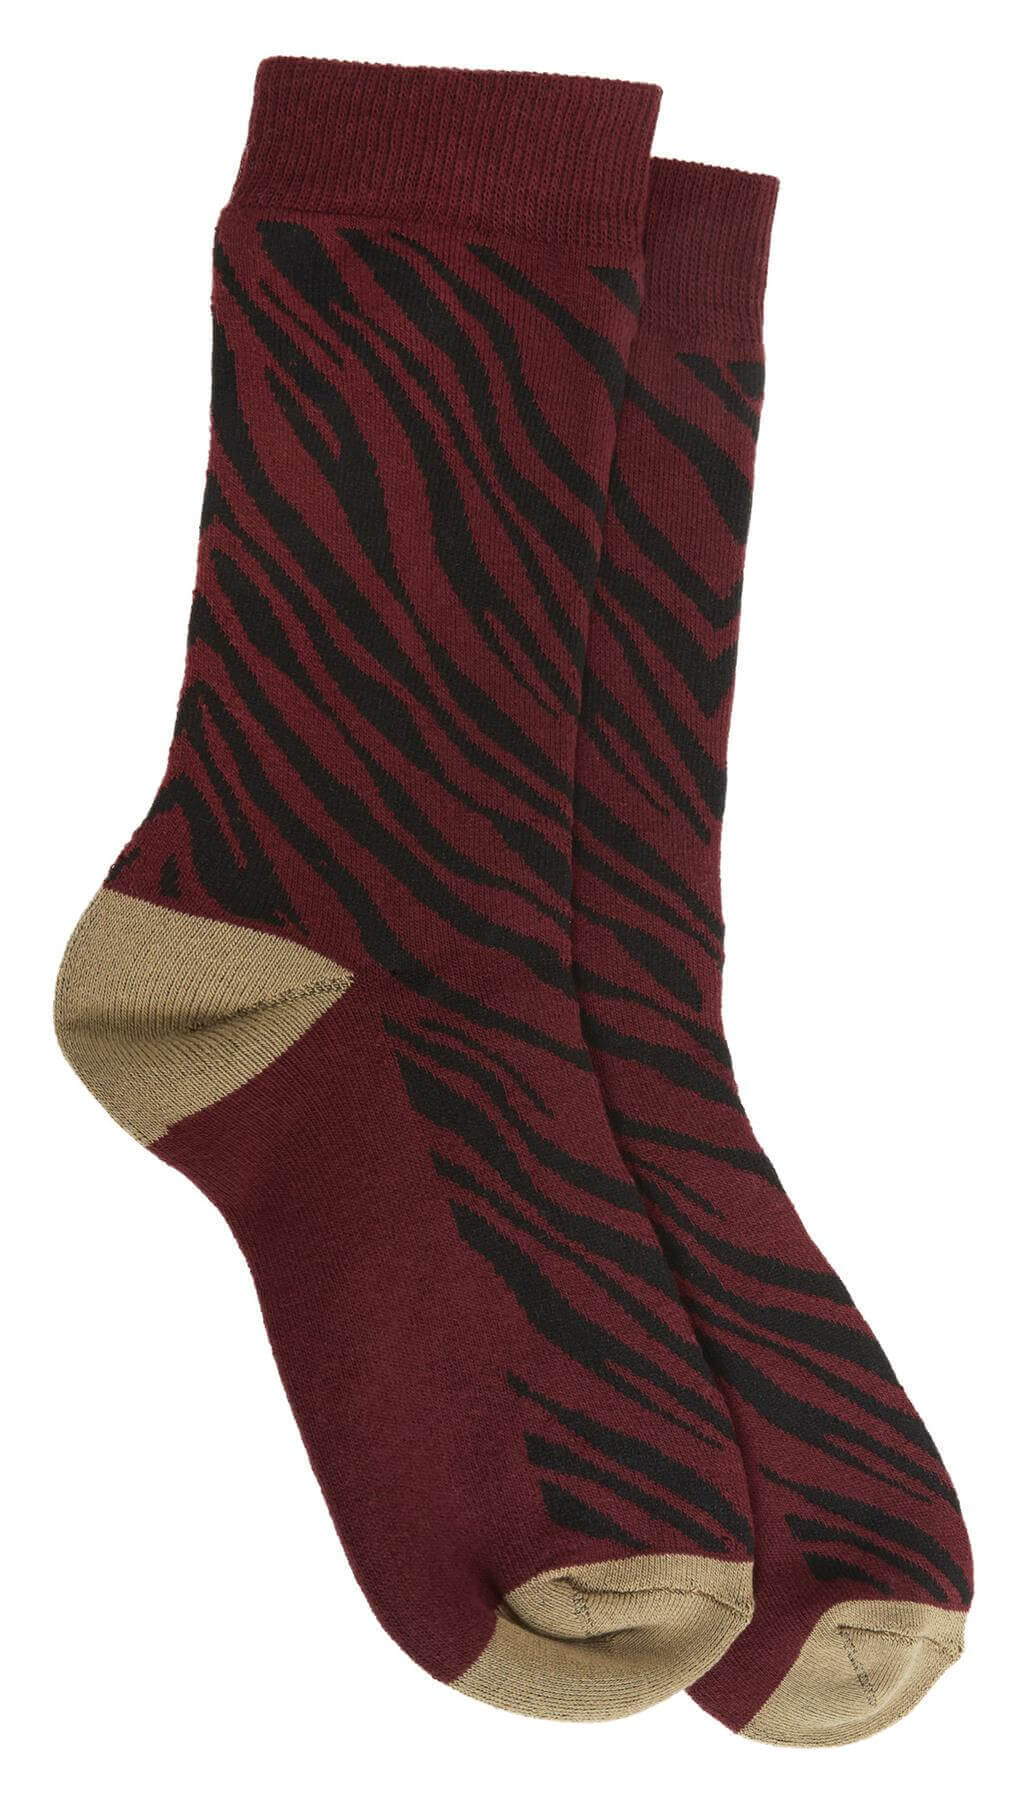 Pack of 6 Women's Animal Print Boot Socks, Summer Walking Hiking Sock Cotton Rich. Buy now for £7.00. A Socks by Sock Stack. 4-7, animal, anti bacterial, anti blister, assorted, boot, breathable, brown, comfortable, cycling, designing, dress socks, footwe